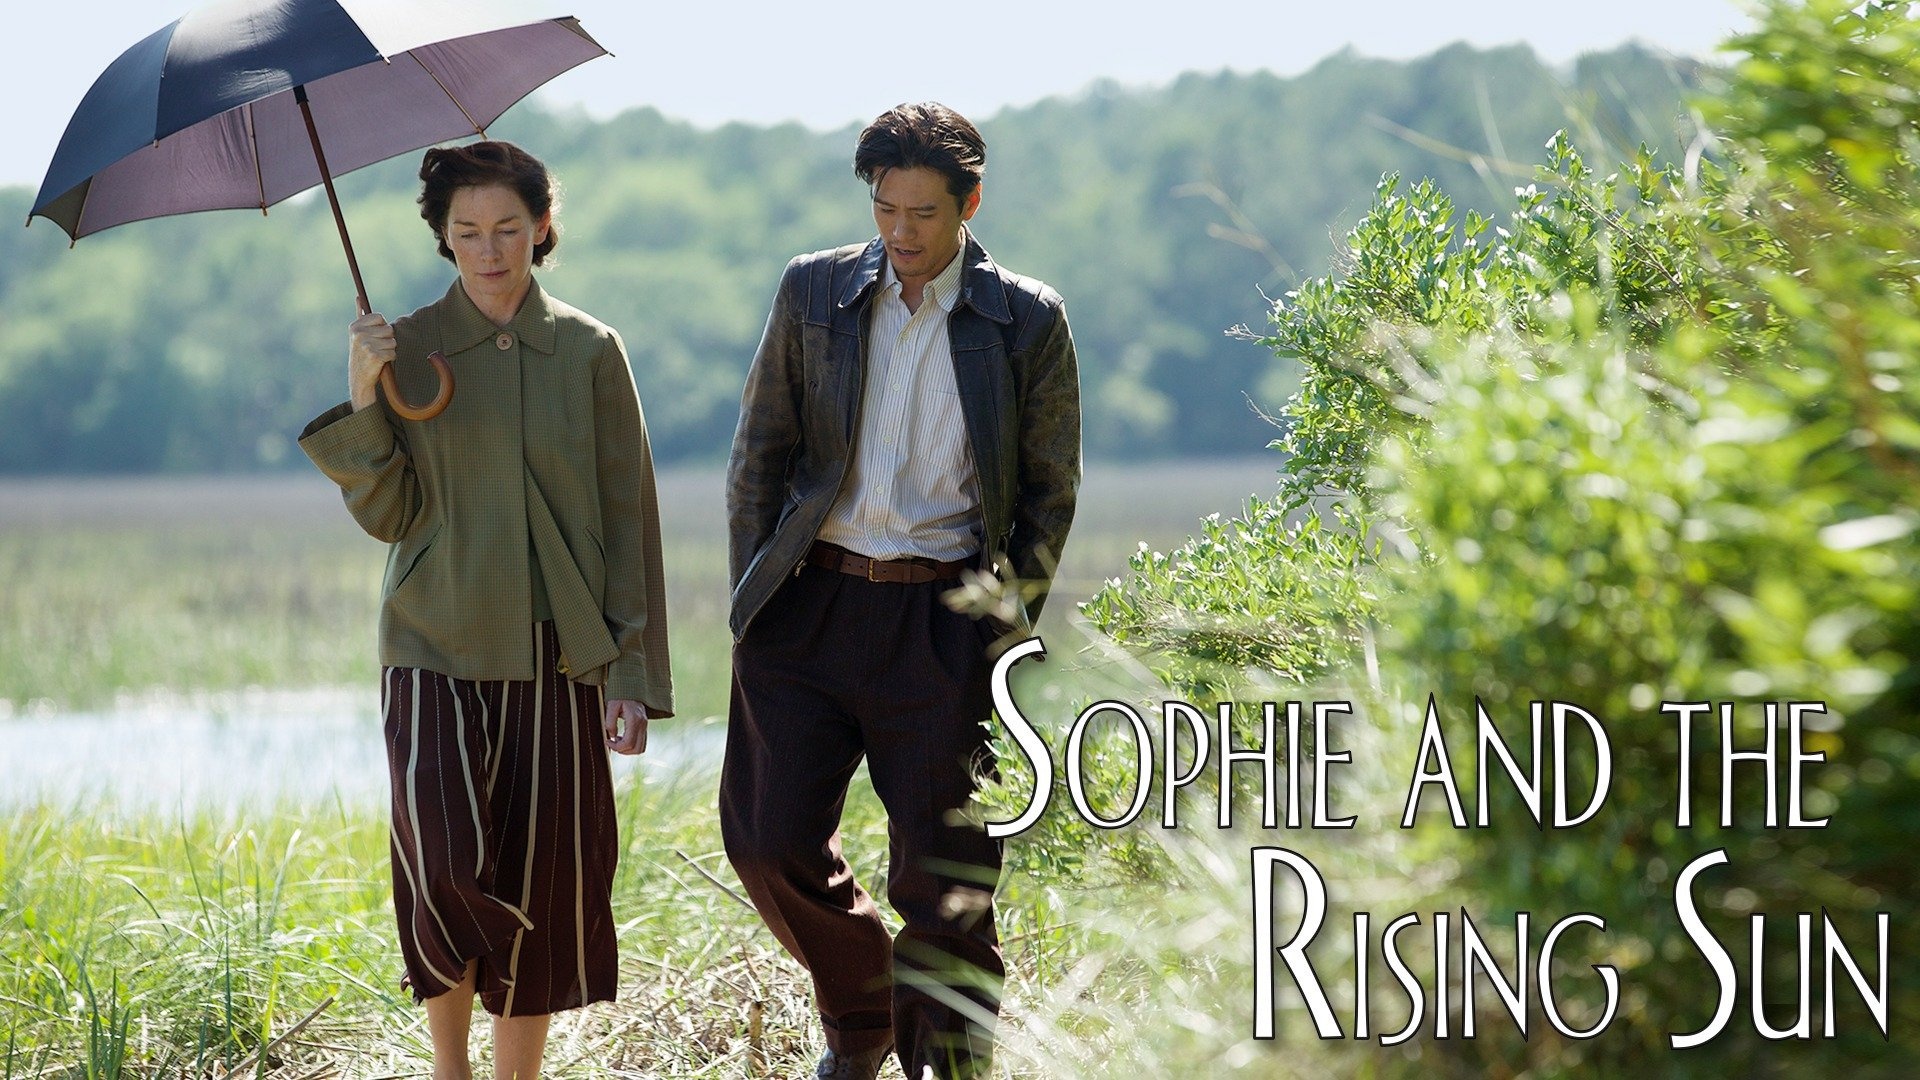 Sophie and the Rising Sun, Movies, Watch Full Movie, Free Online, 1920x1080 Full HD Desktop